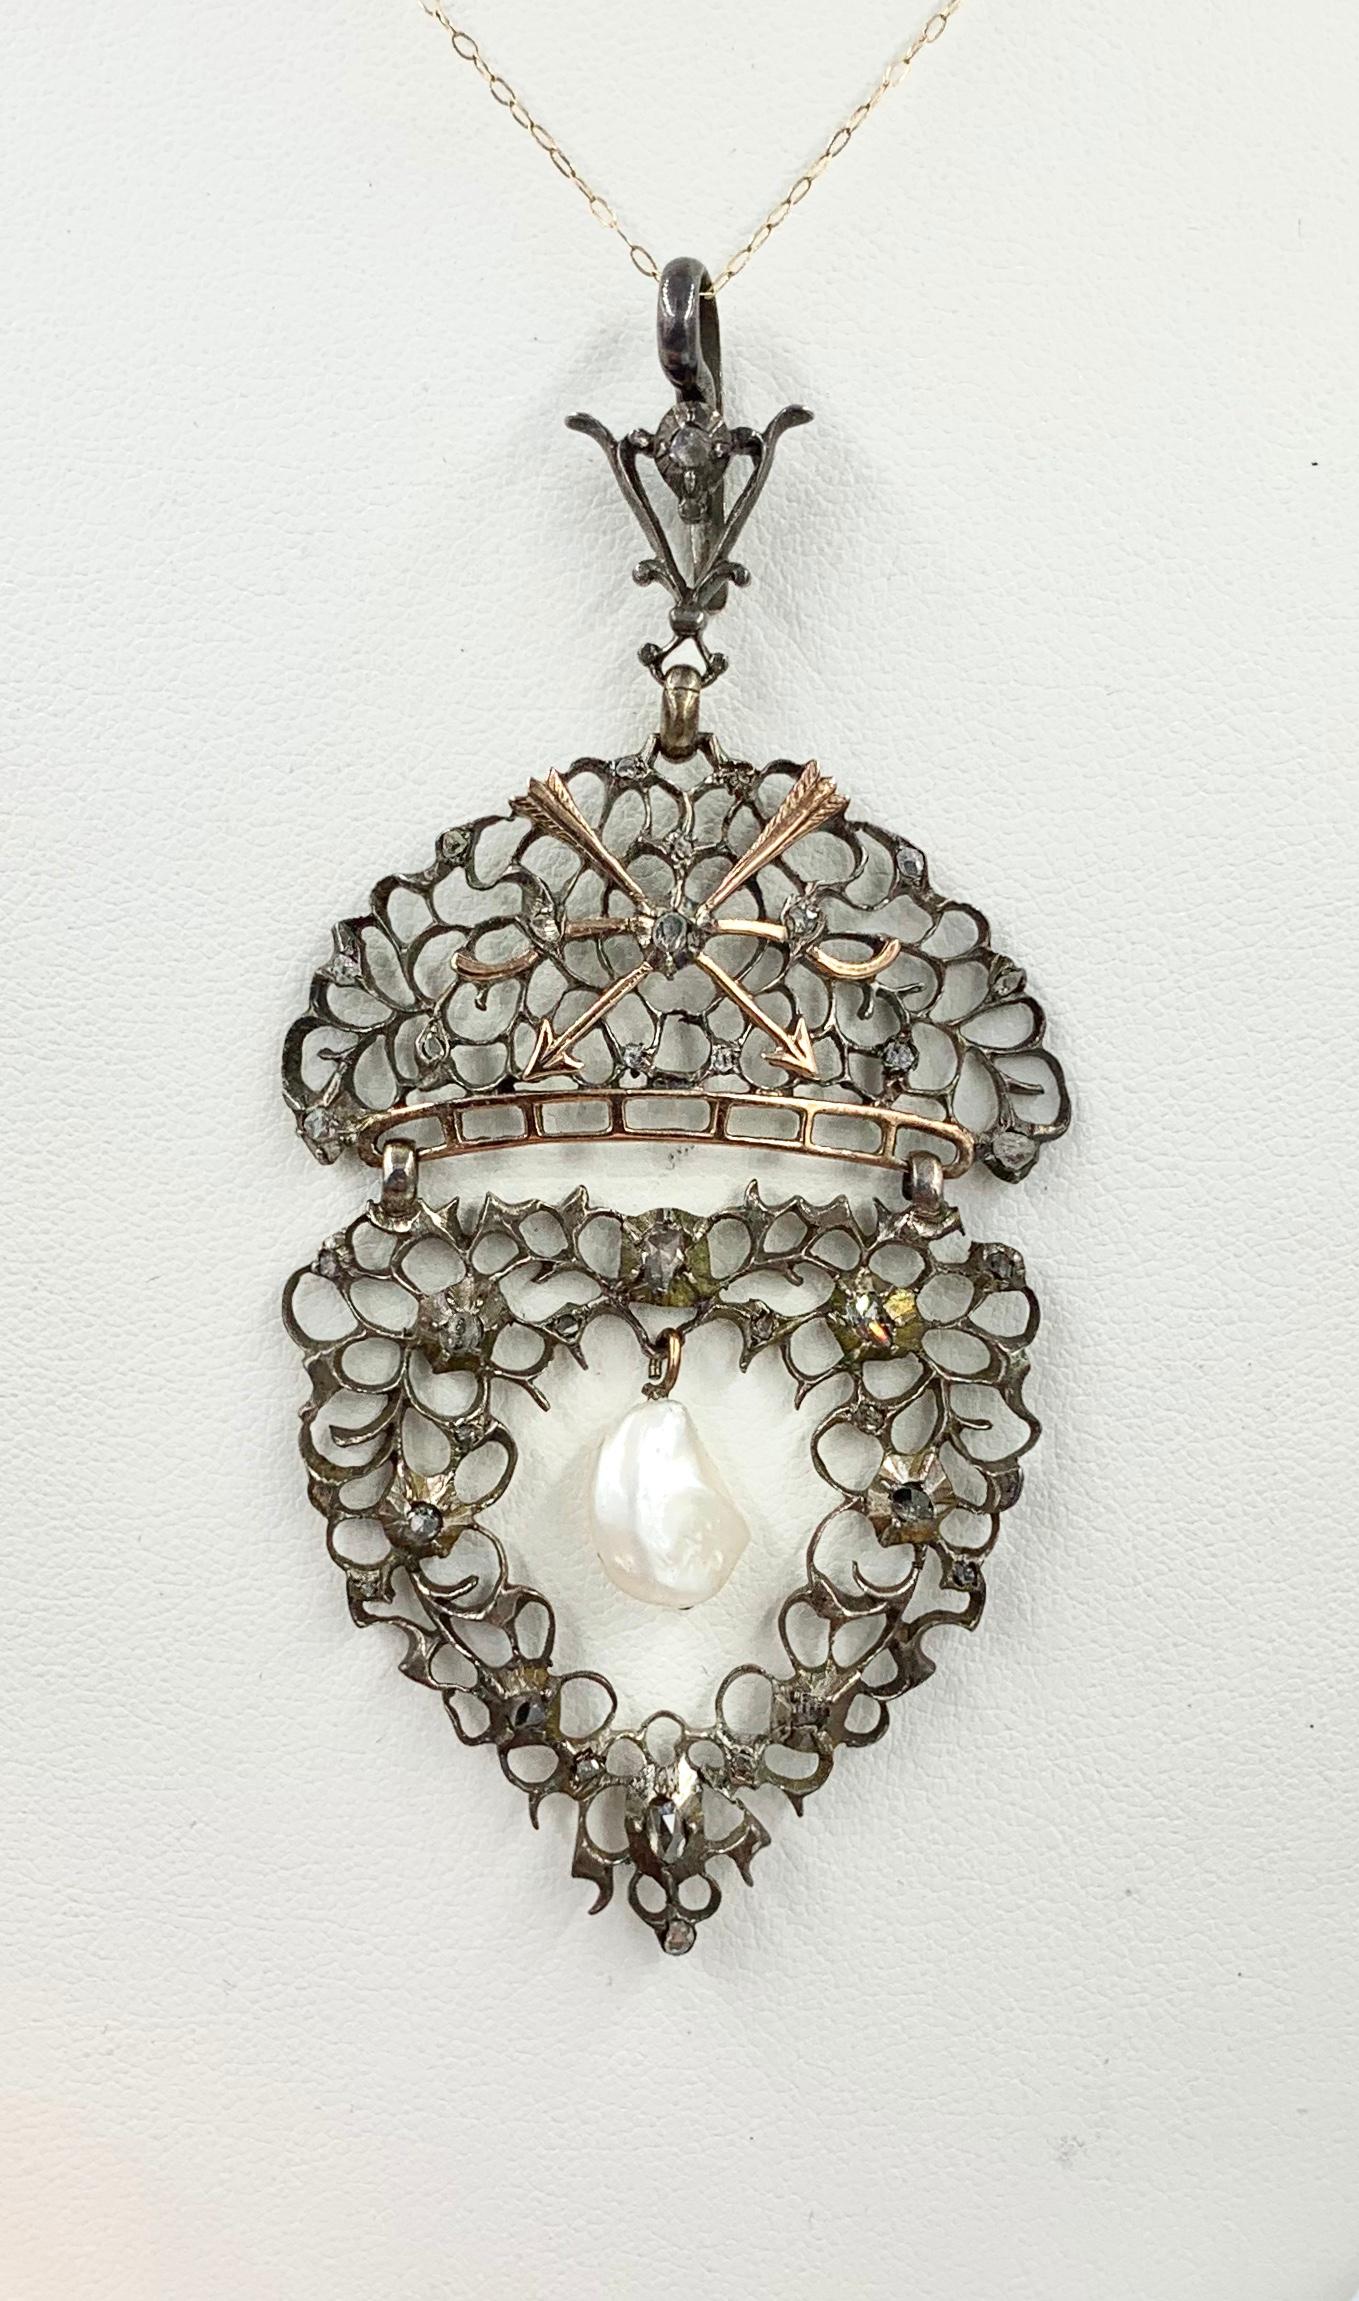 This is a spectacular Museum Quality Antique Pendant in the Renaissance Revival style set with Rose Cut Diamonds and a central hanging Baroque Pearl made by the acclaimed British jewelers, Child & Child (1880-1916), of London.  The pendant remains